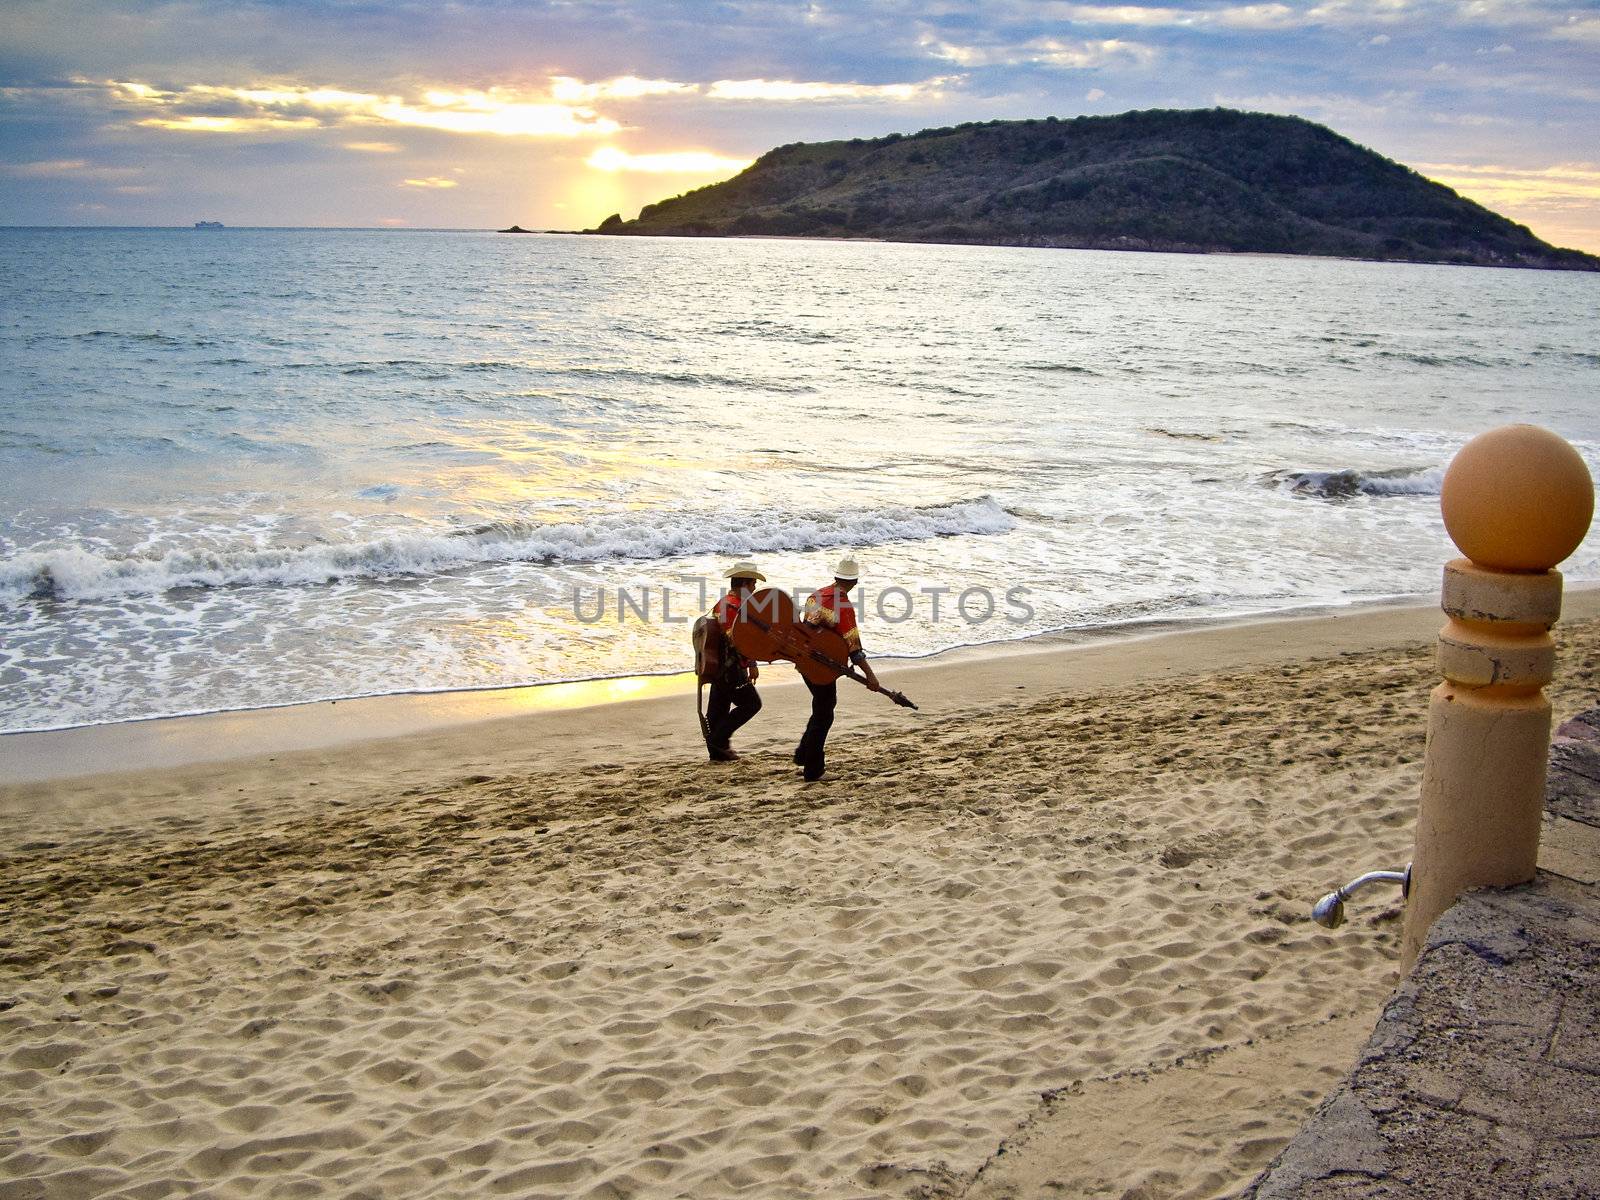 Mariachis head home along the beach at sunset by emattil